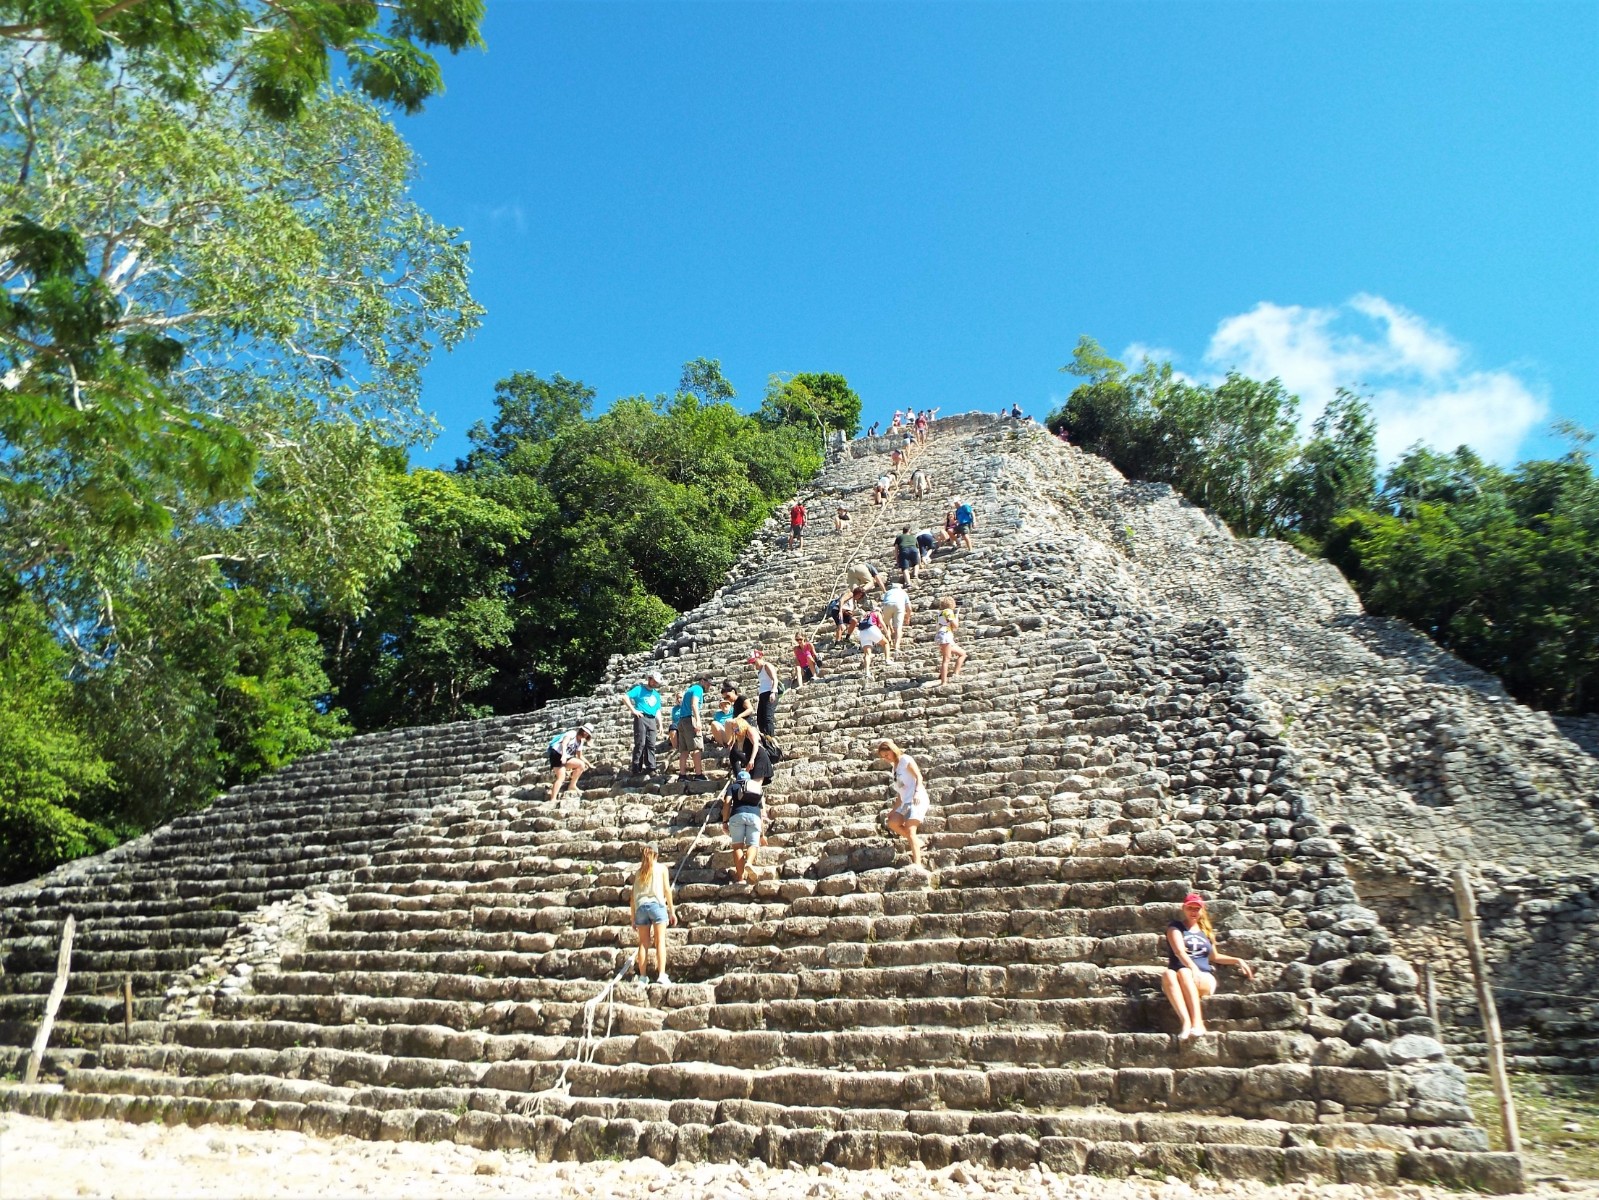 Coba...Climb at your own risk!